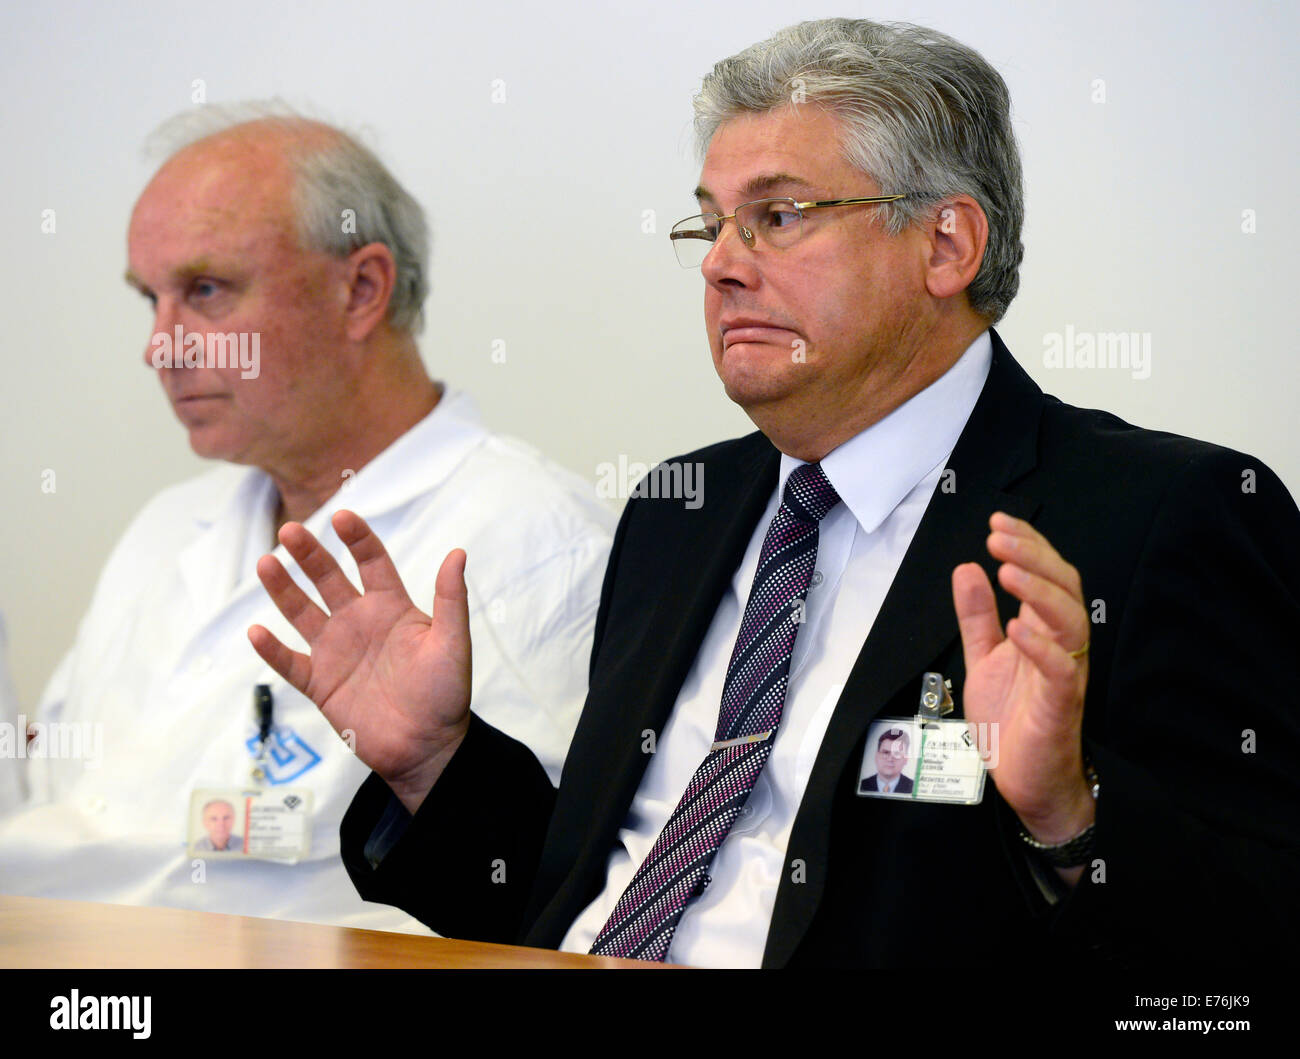 Director of the University Hospital in Motol Miloslav Ludvik, right, speaks at the press conference as the head of the Department of Pediatric Haematology and Oncology Jan Stary, left, looks on, in Prague, Czech Republic, on Monday, Sept. 8, 2014. Five-years-old Briton Ashya King with a brain tumour will be treated by protons in Prague, a doctors´ council decided today in Motol, where the boy will be hospitalised, the doctors have told journalists. According to news agencies, the boy left a Spanish hospital by an ambulance this morning and he is supposed to be flown to Prague. (CTK Photo/Roman Stock Photo